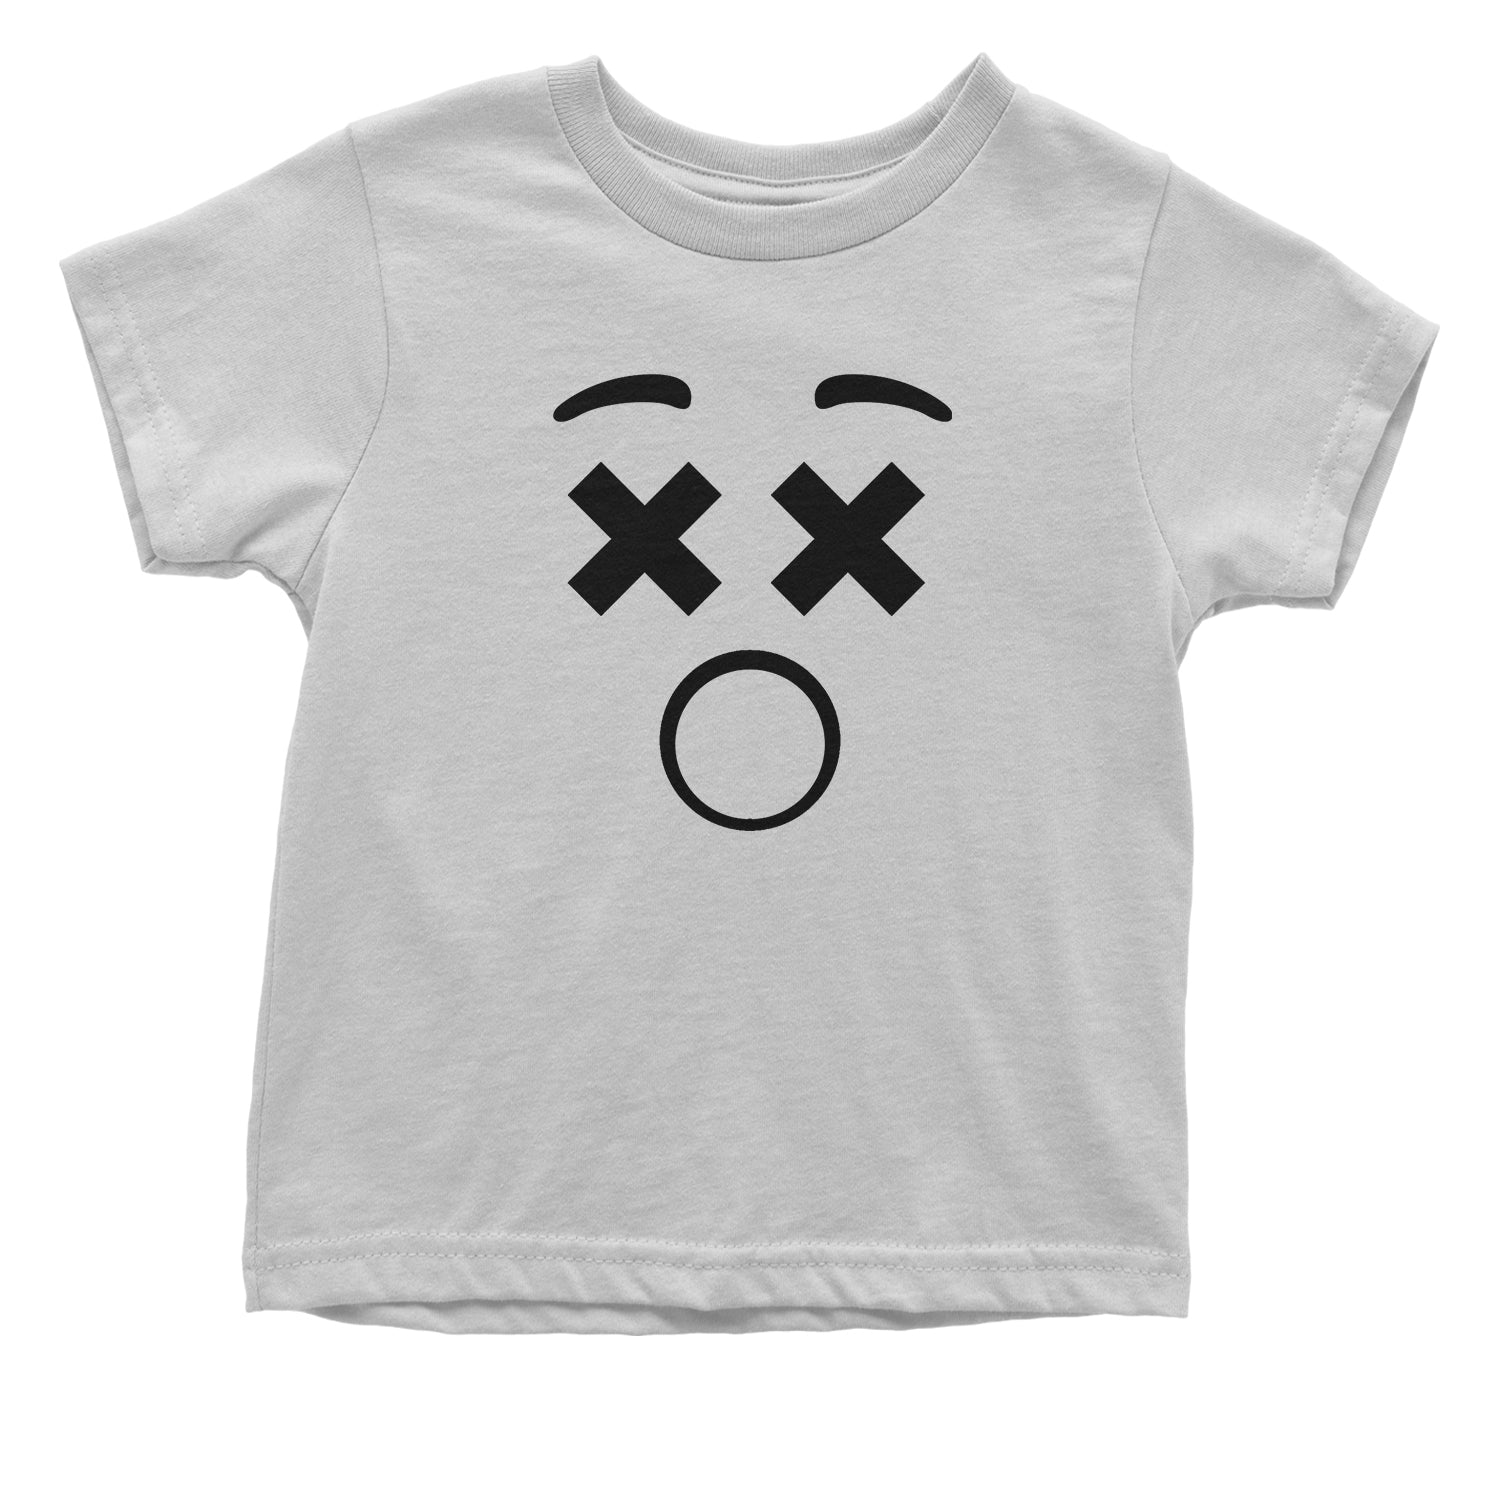 Emoticon XX Eyes Smile Face Toddler T-Shirt cosplay, costume, dress, emoji, emote, face, halloween, smiley, up, yellow by Expression Tees